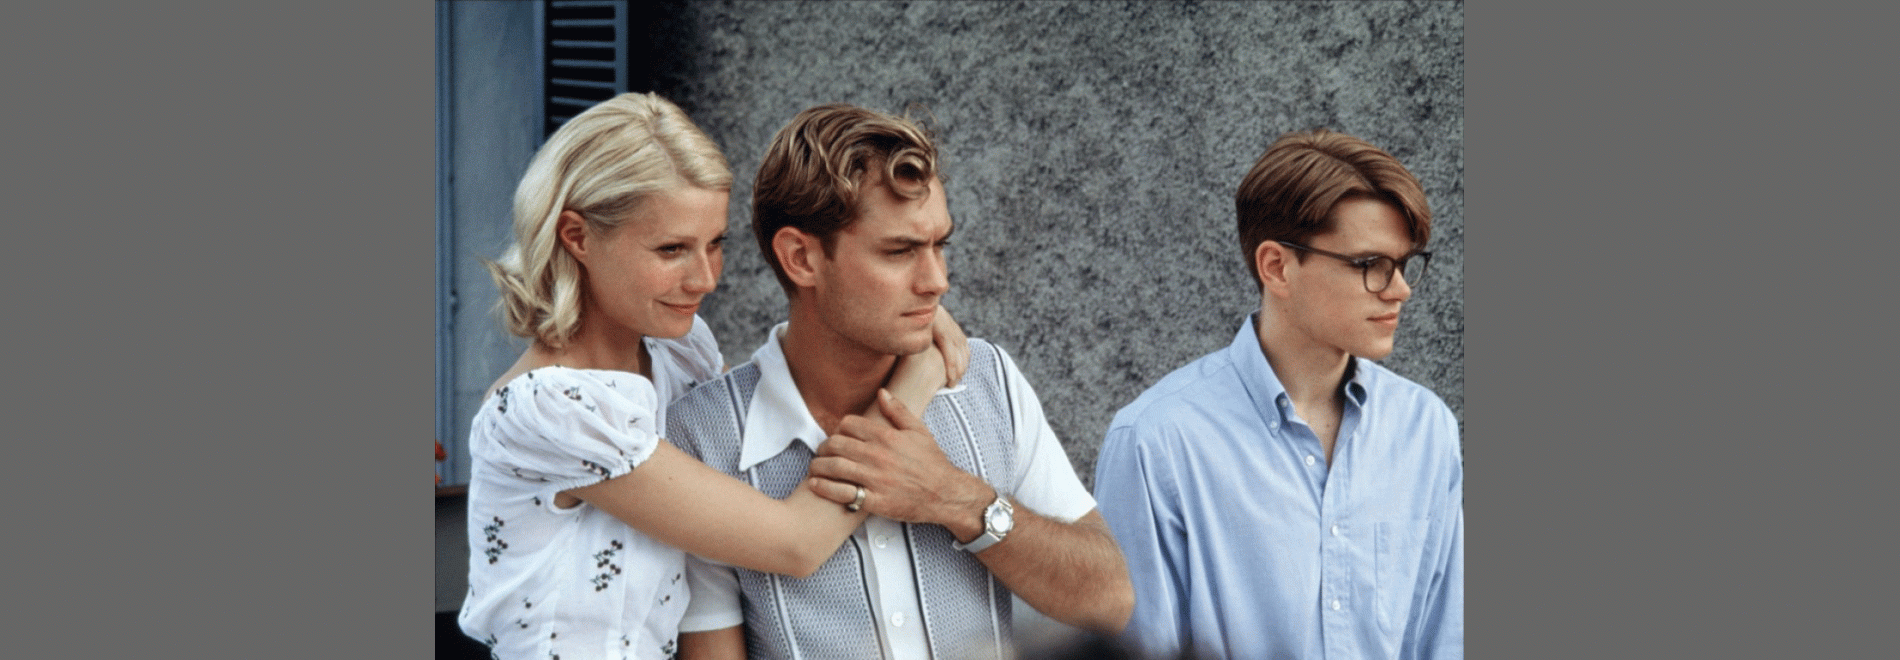 The Talented Mr. Ripley 